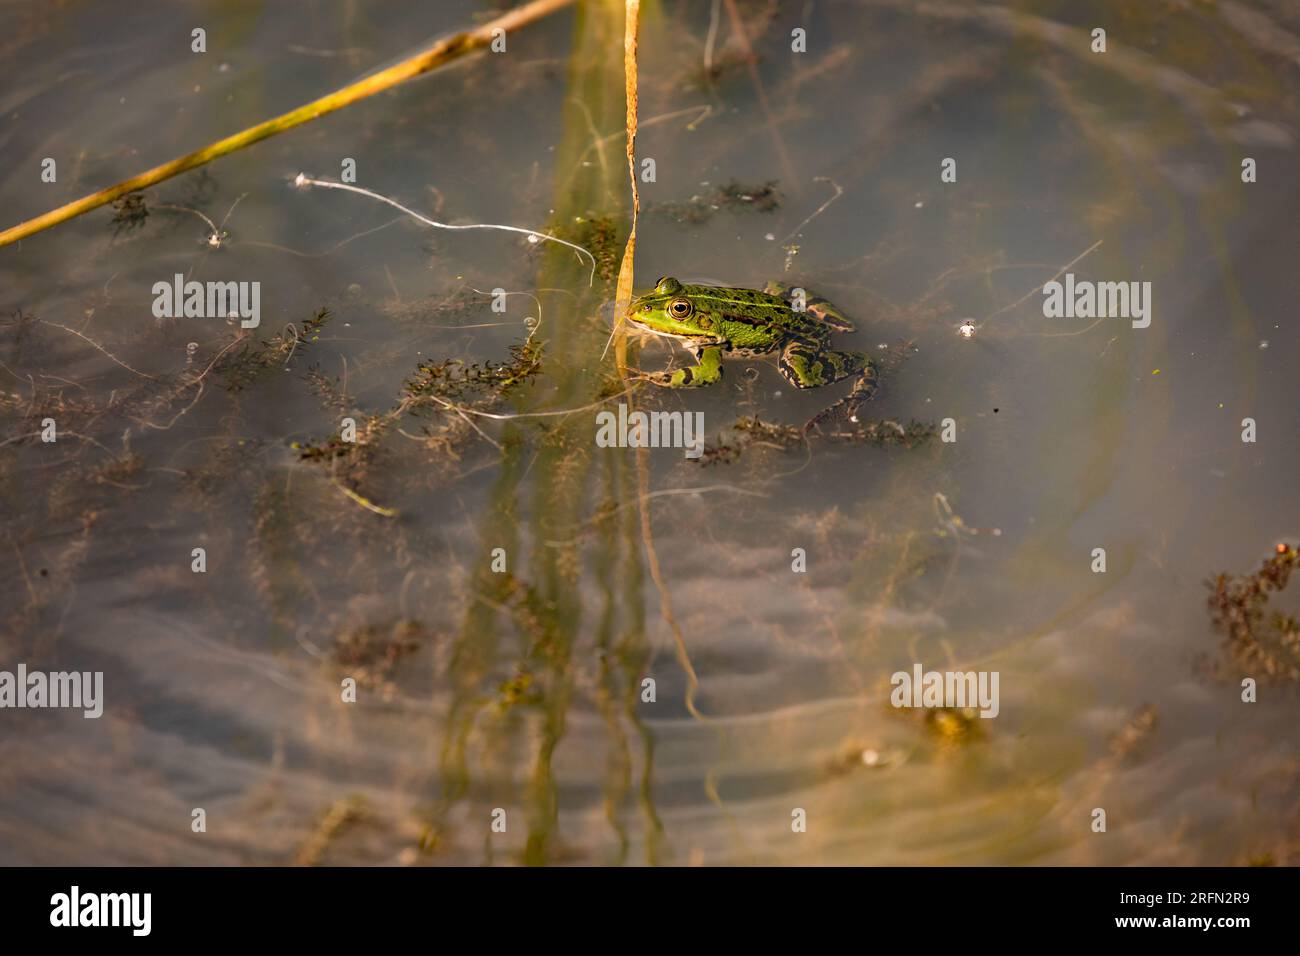 A green water frog in a wetland, waiting for insects to appear Stock Photo